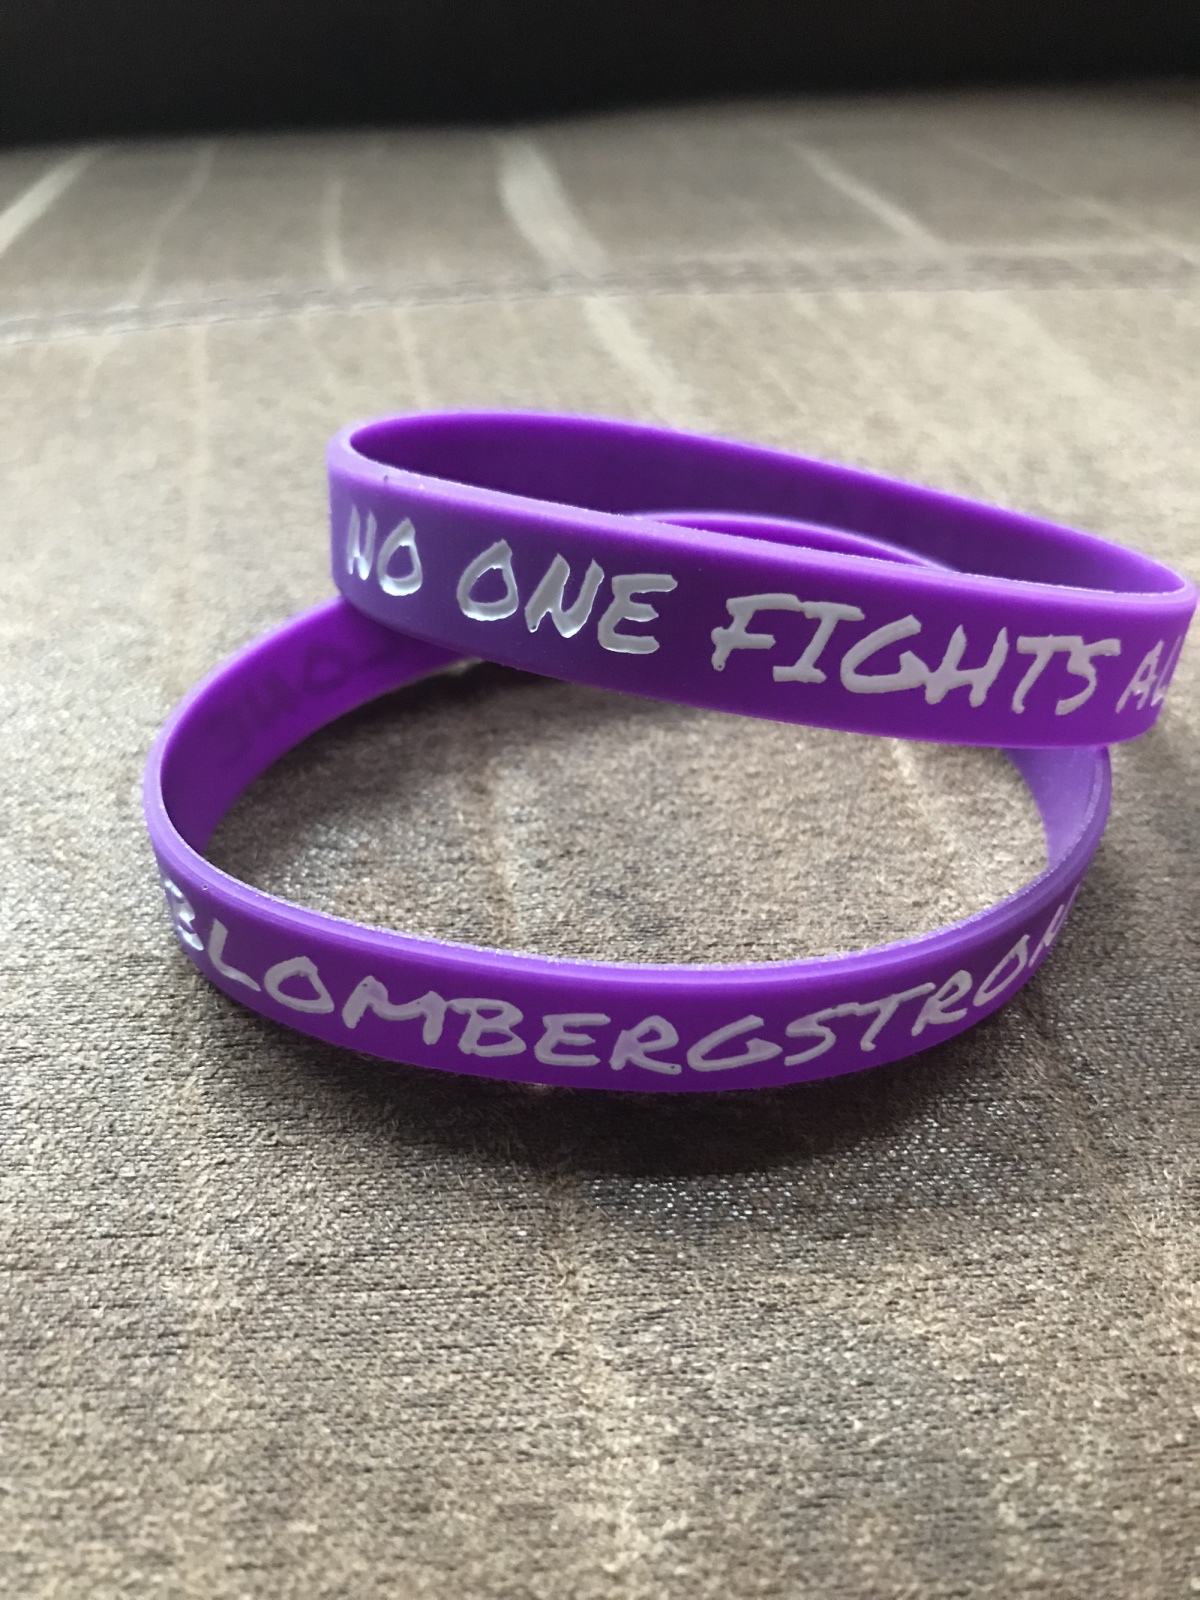 Contact us if you would like to order a $5 arm band to support Jerry & Jennifer.